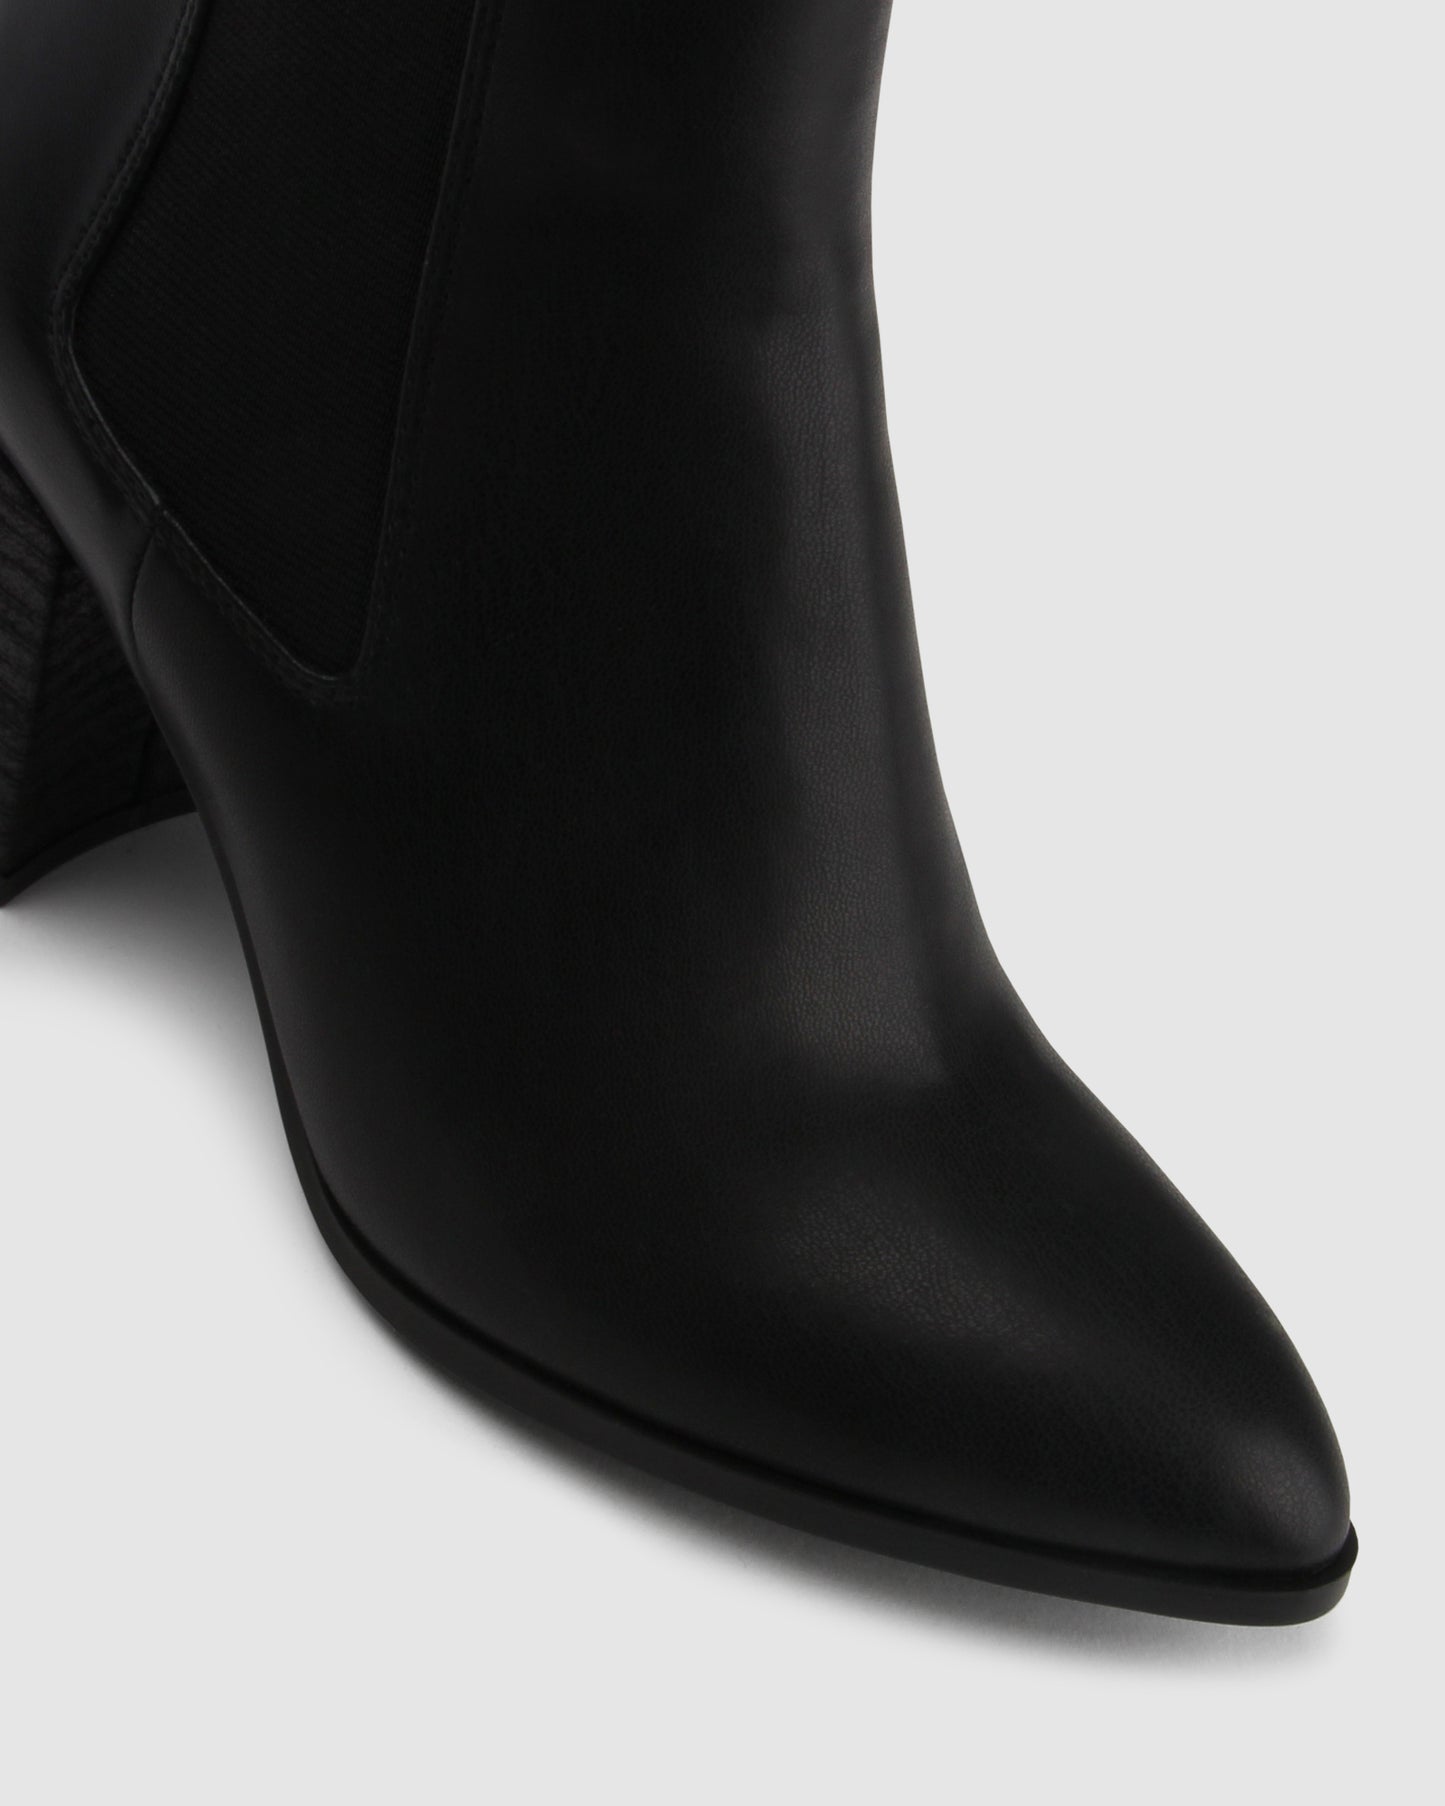 COURTNEY Heeled Chelsea Boots